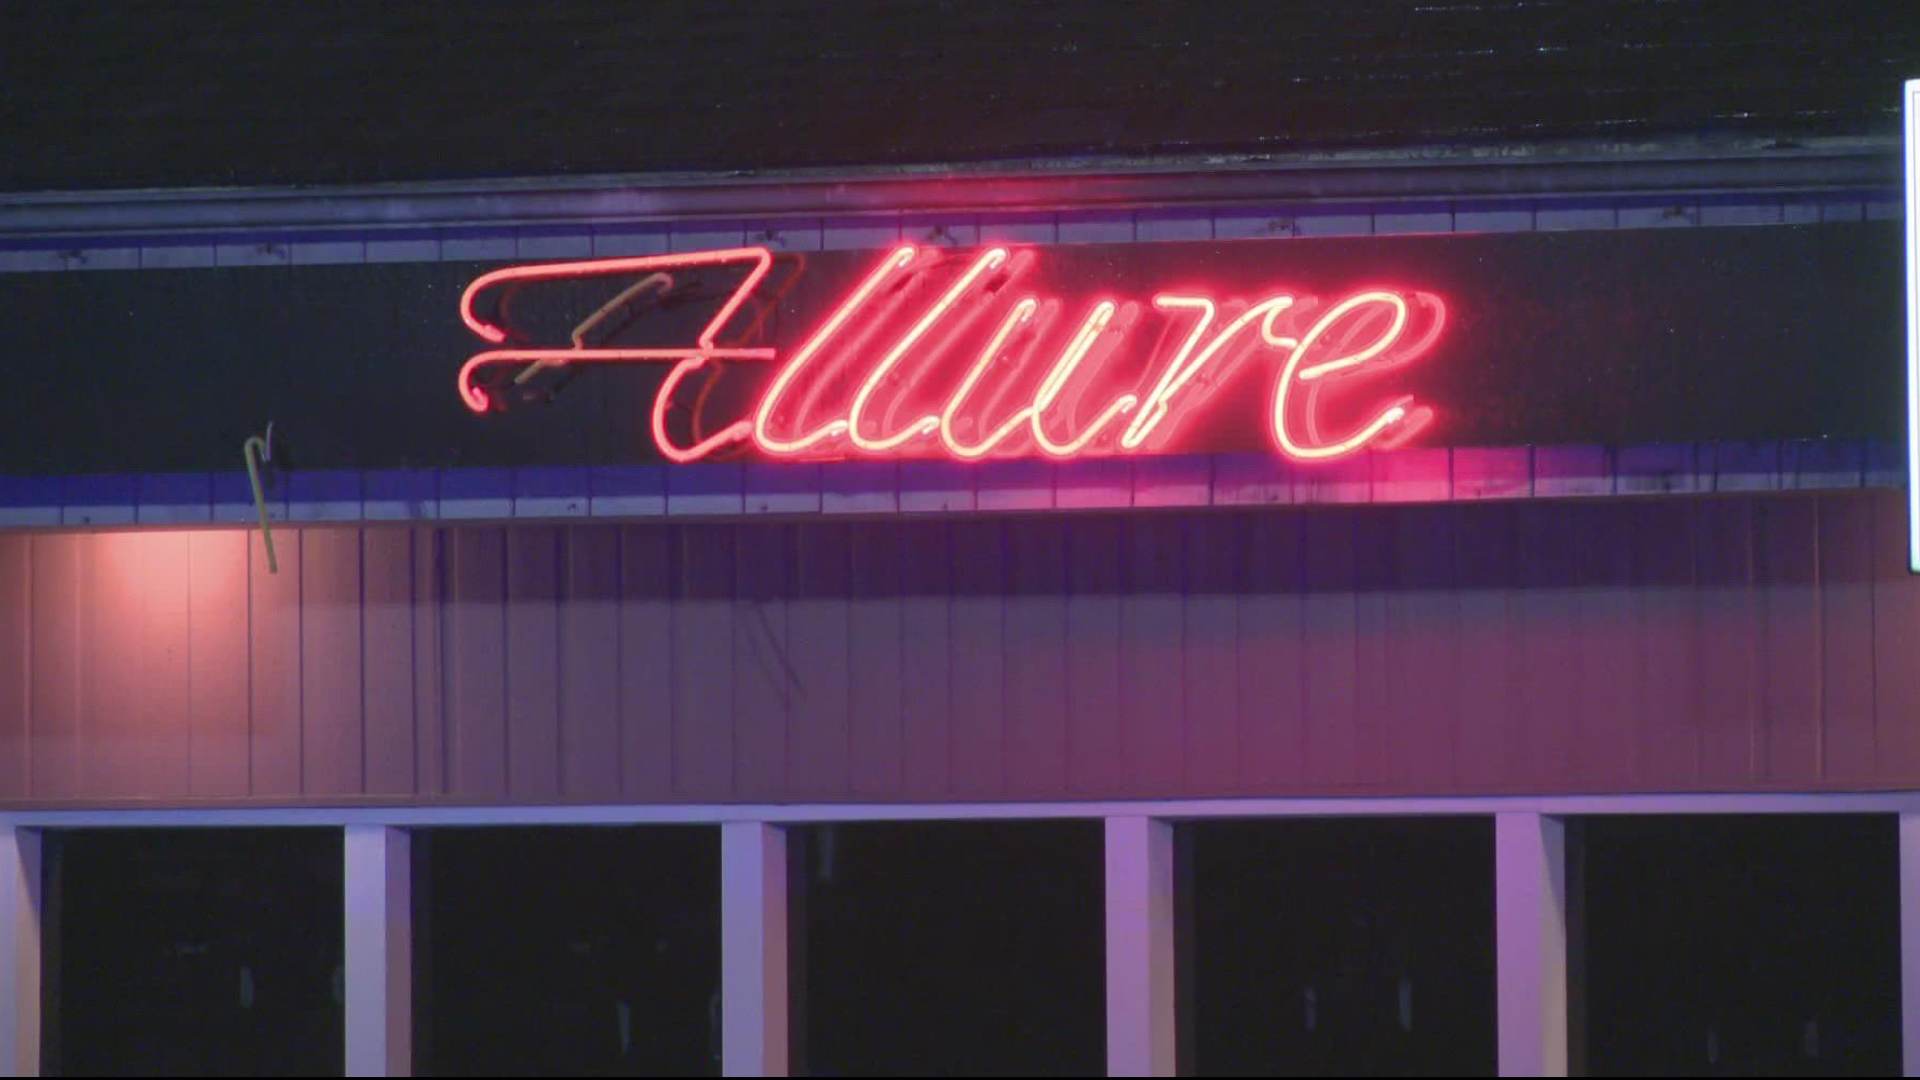 Virginia Beach Police said two people have died after being shot in the parking lot of Allure located on Newtown Road, Thursday night.